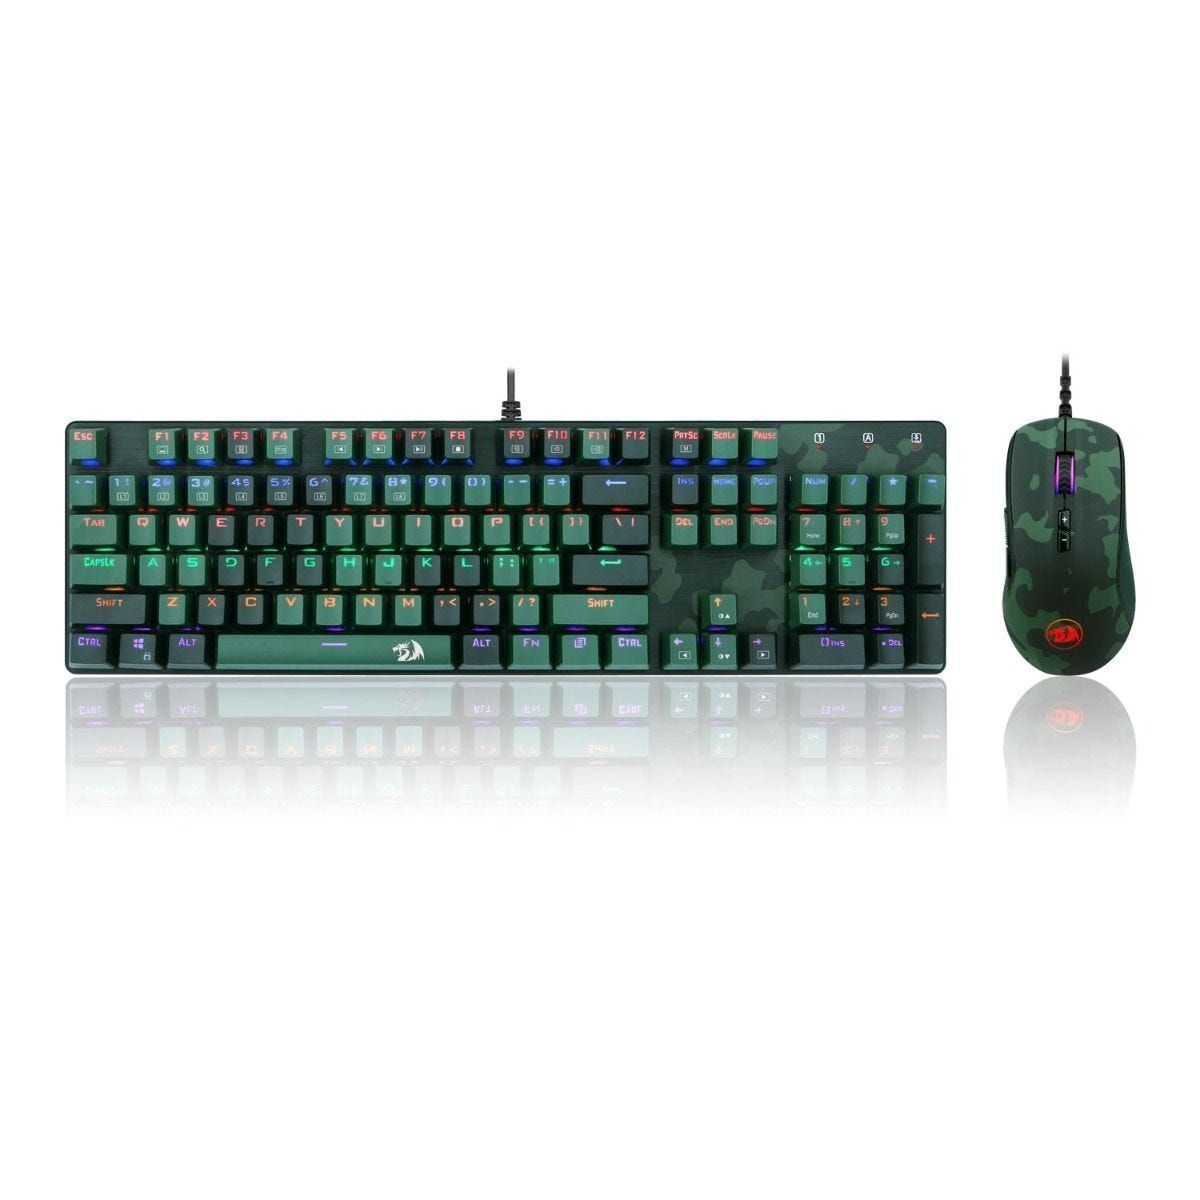 Redragon Keyboard mouse comboS108 lightgreen Full Sized